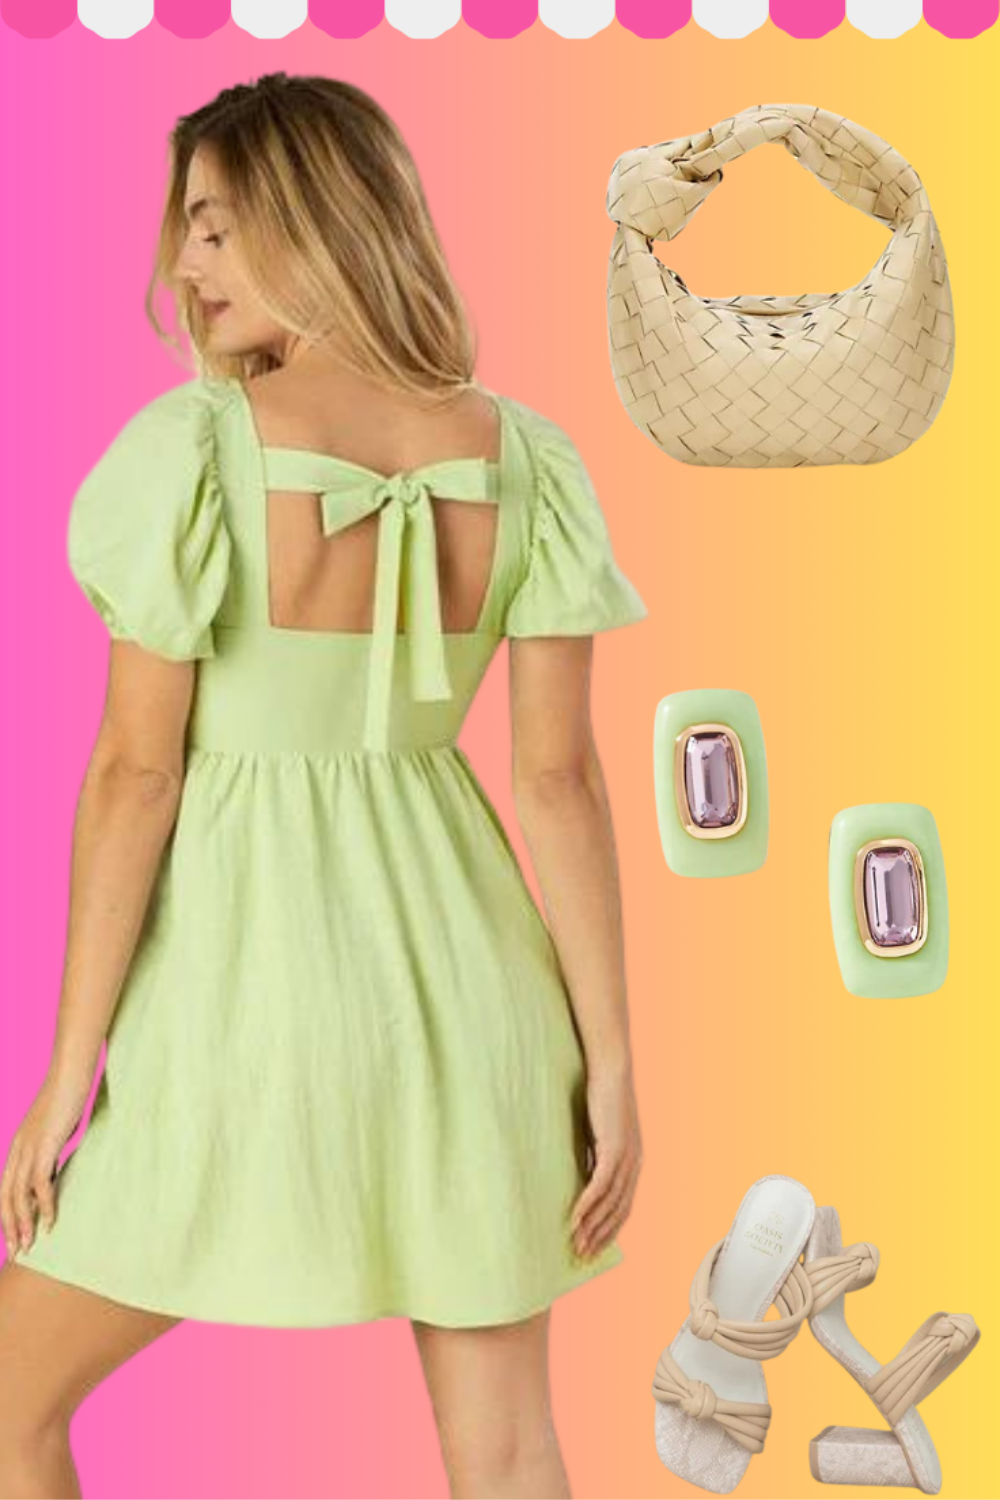 Shop this Pretty & Preppy Summer Picnic Date Outfit!